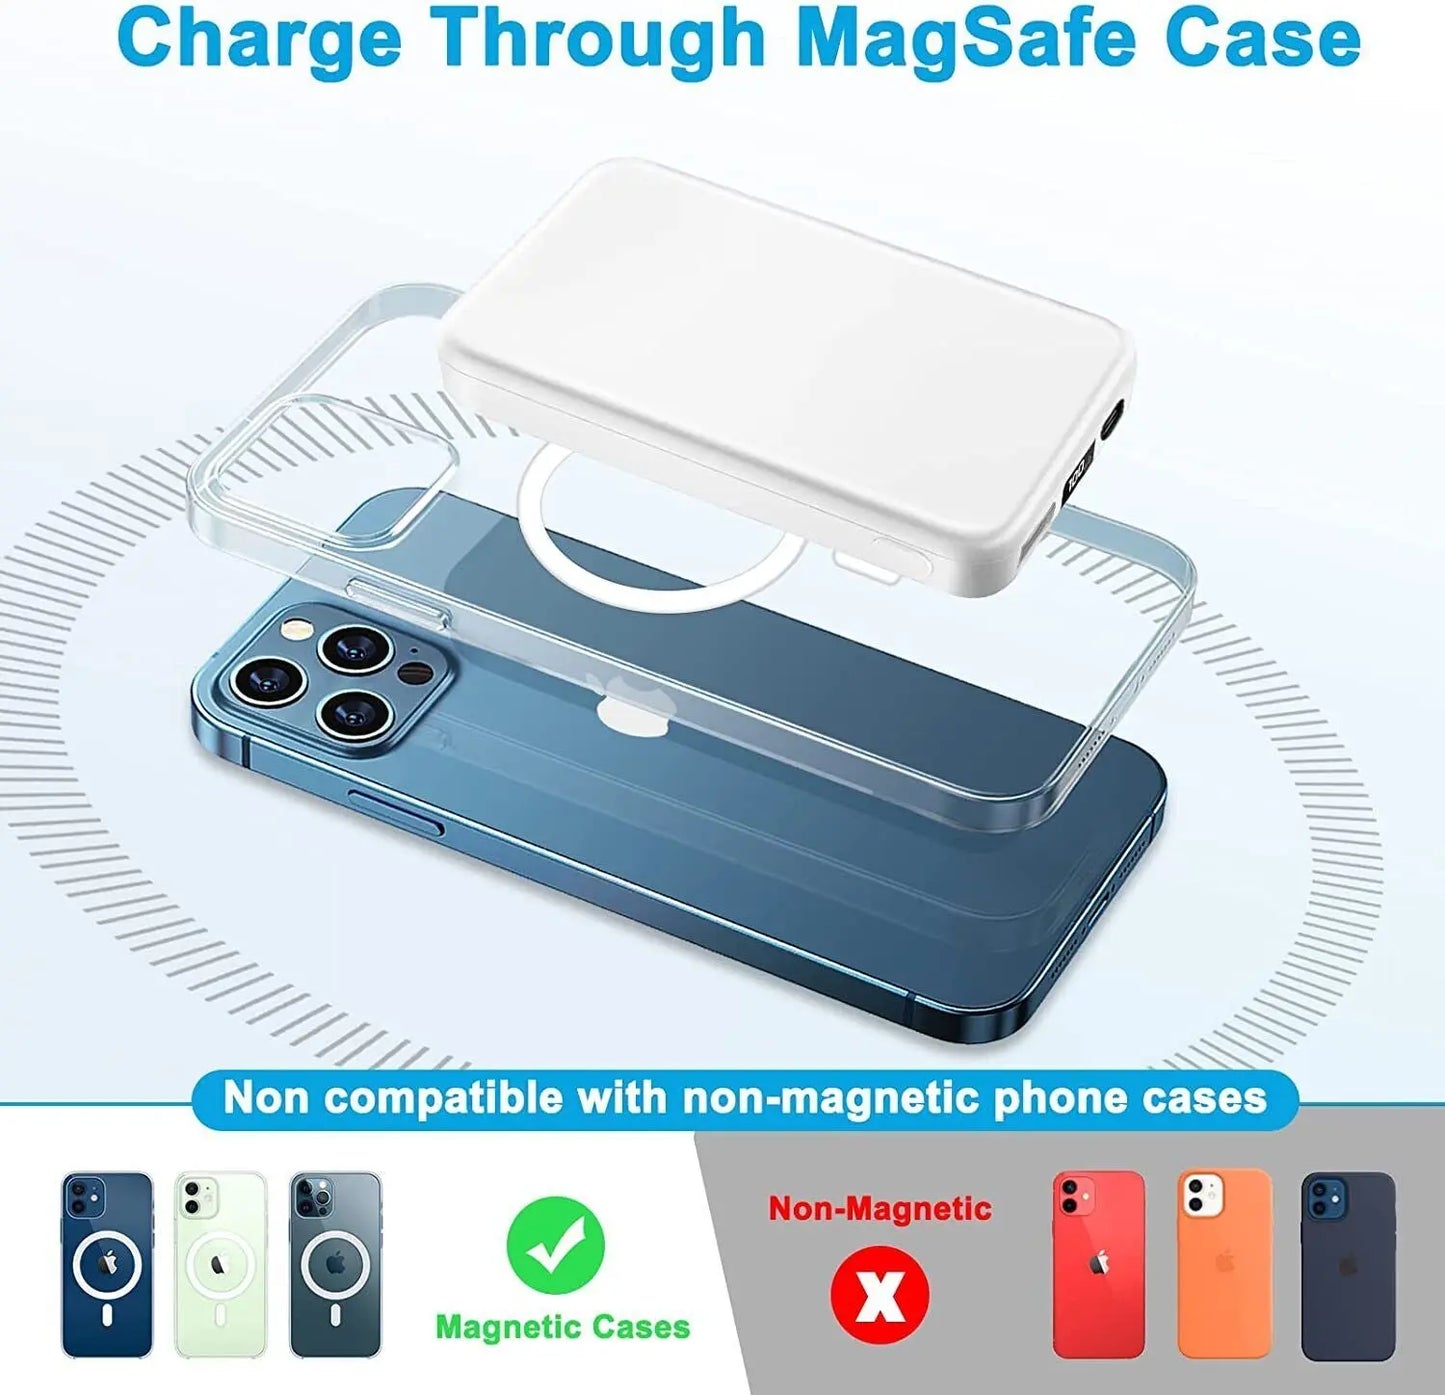 Magsafe Magnetic Battery Pack 10000 mAh with Kickstand - mobgr